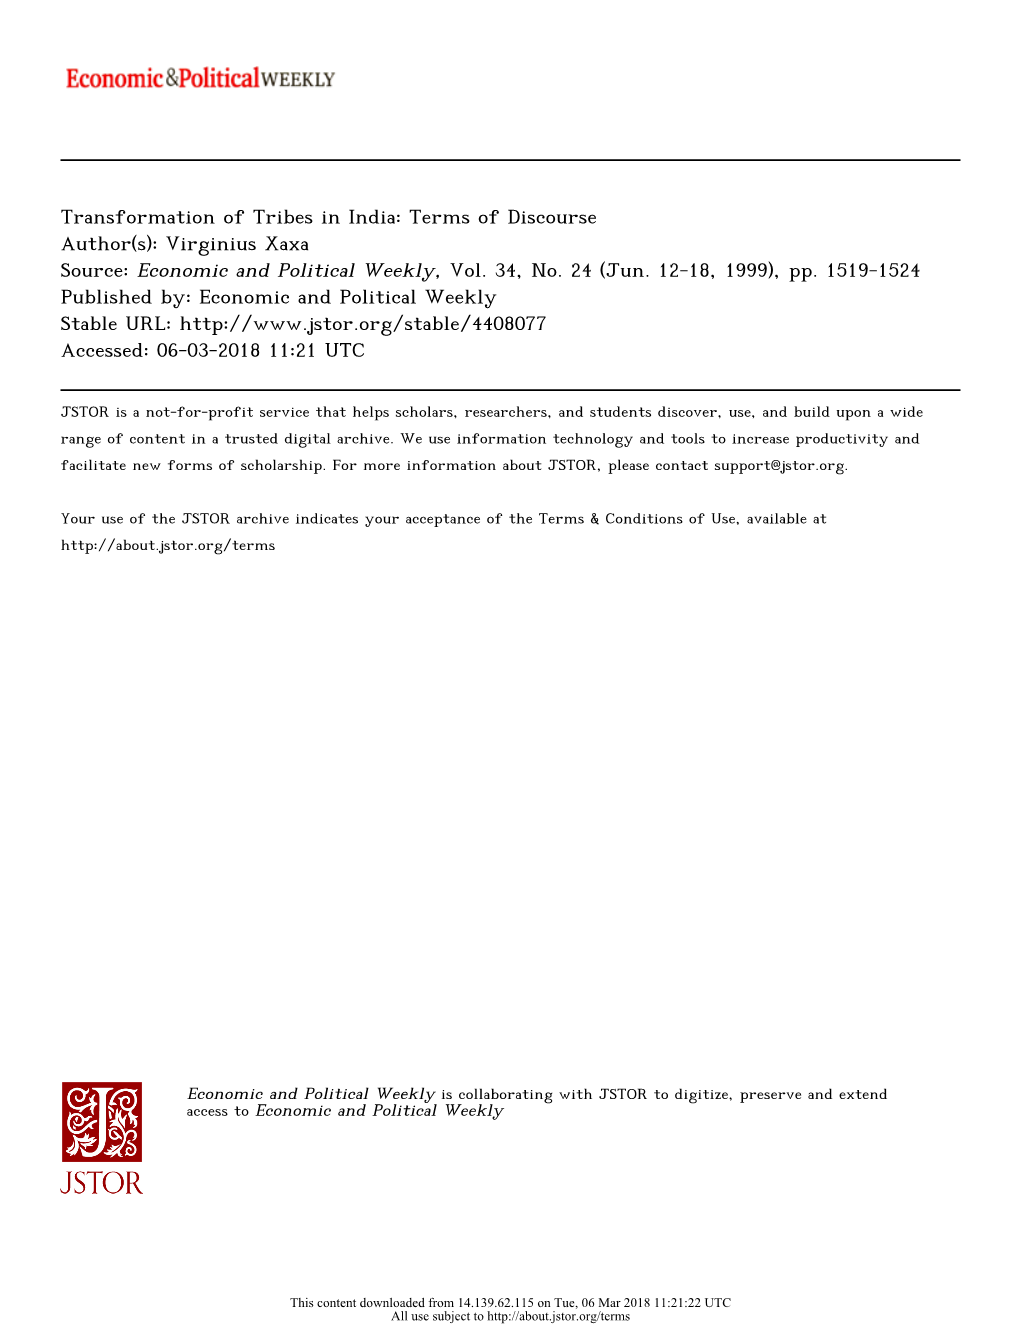 Transformation of Tribes in India: Terms of Discourse Author(S): Virginius Xaxa Source: Economic and Political Weekly, Vol